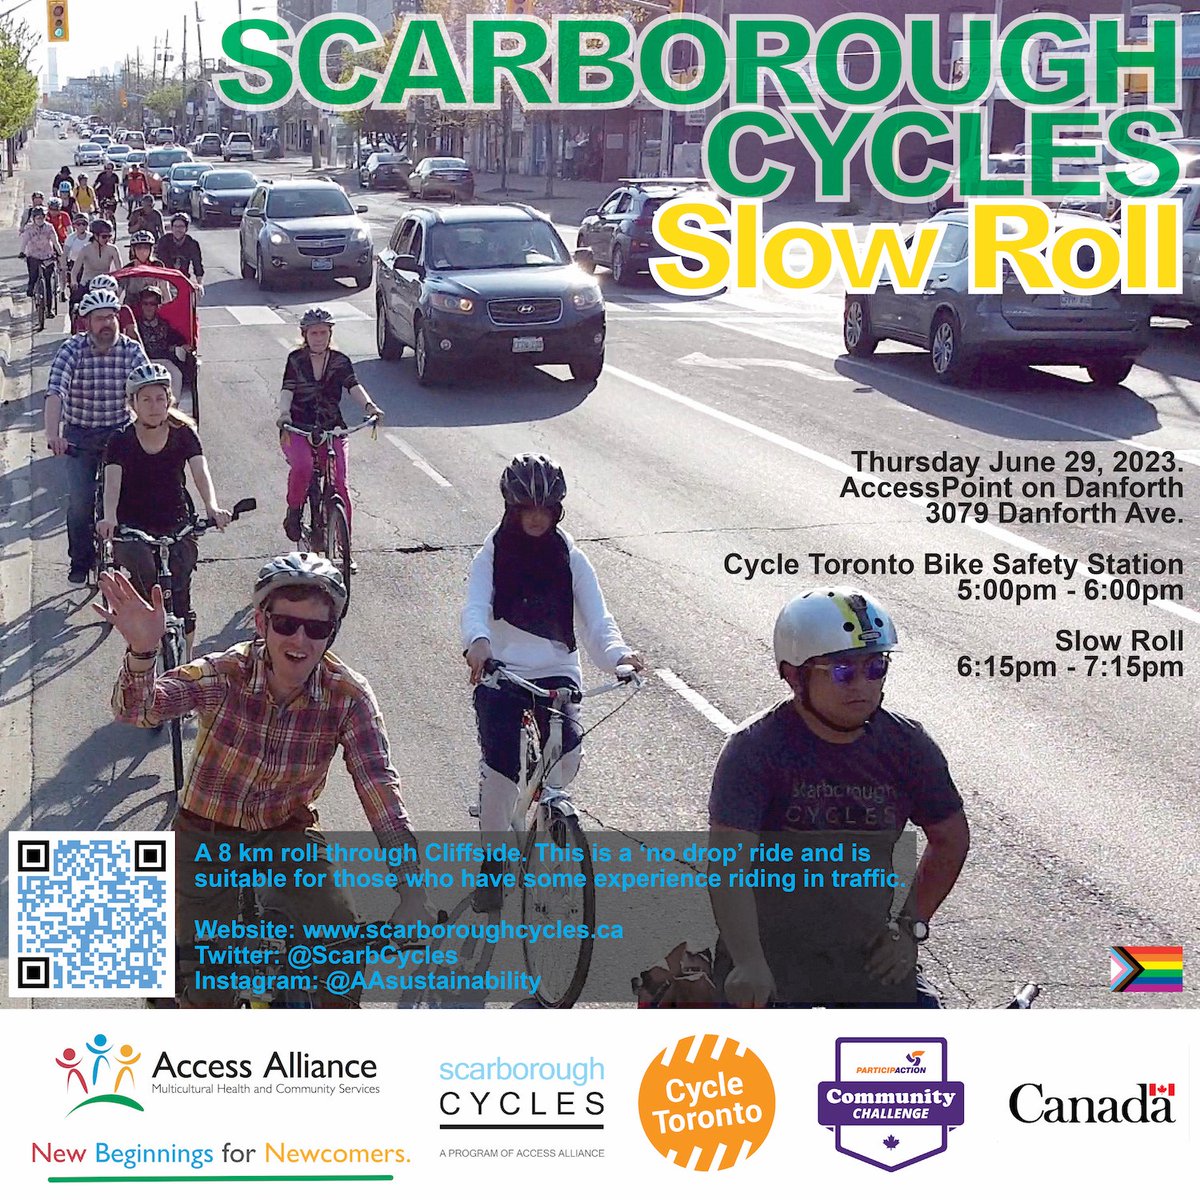 Slow Roll
Thursday June 29, 2023.
AccessPoint on Danforth
3079 Danforth Ave

5:00pm-6:00pm
Get your bike tuned up, at the Cycle Toronto Bike Safety Station. 

6:15pm-7:15pm
Join us for a 8 km group ride through Cliffside!

#bikeTO #ScarbTO #Ward20 #BikeMonth